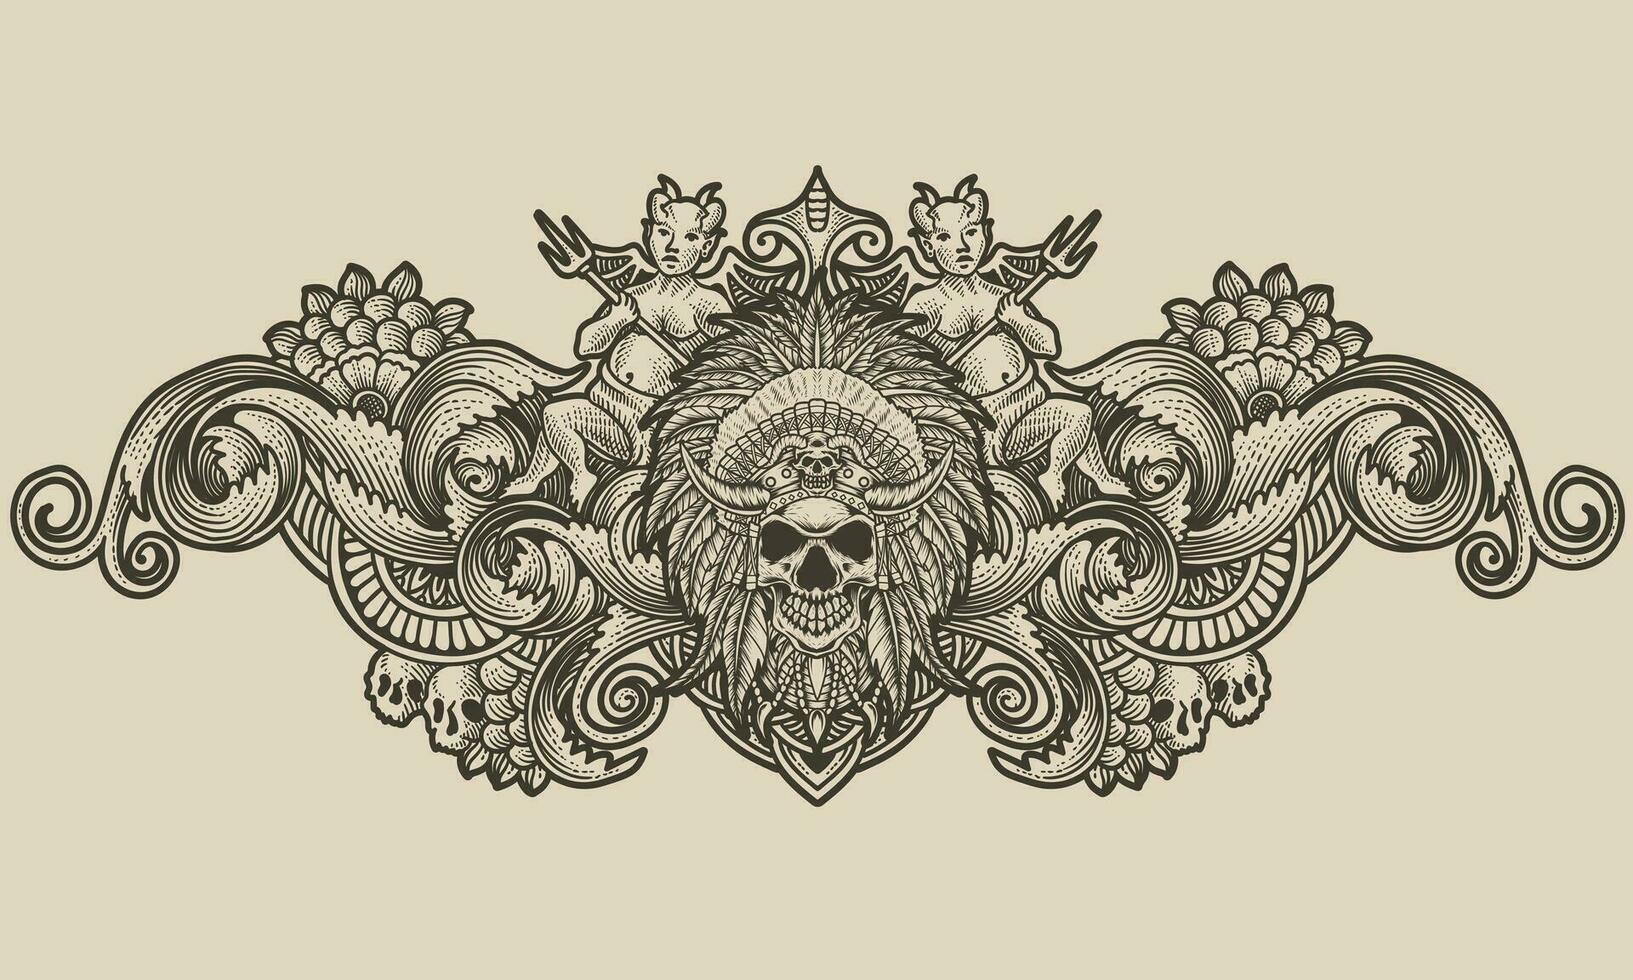 Indian apache skull head with vintage engraving ornament vector